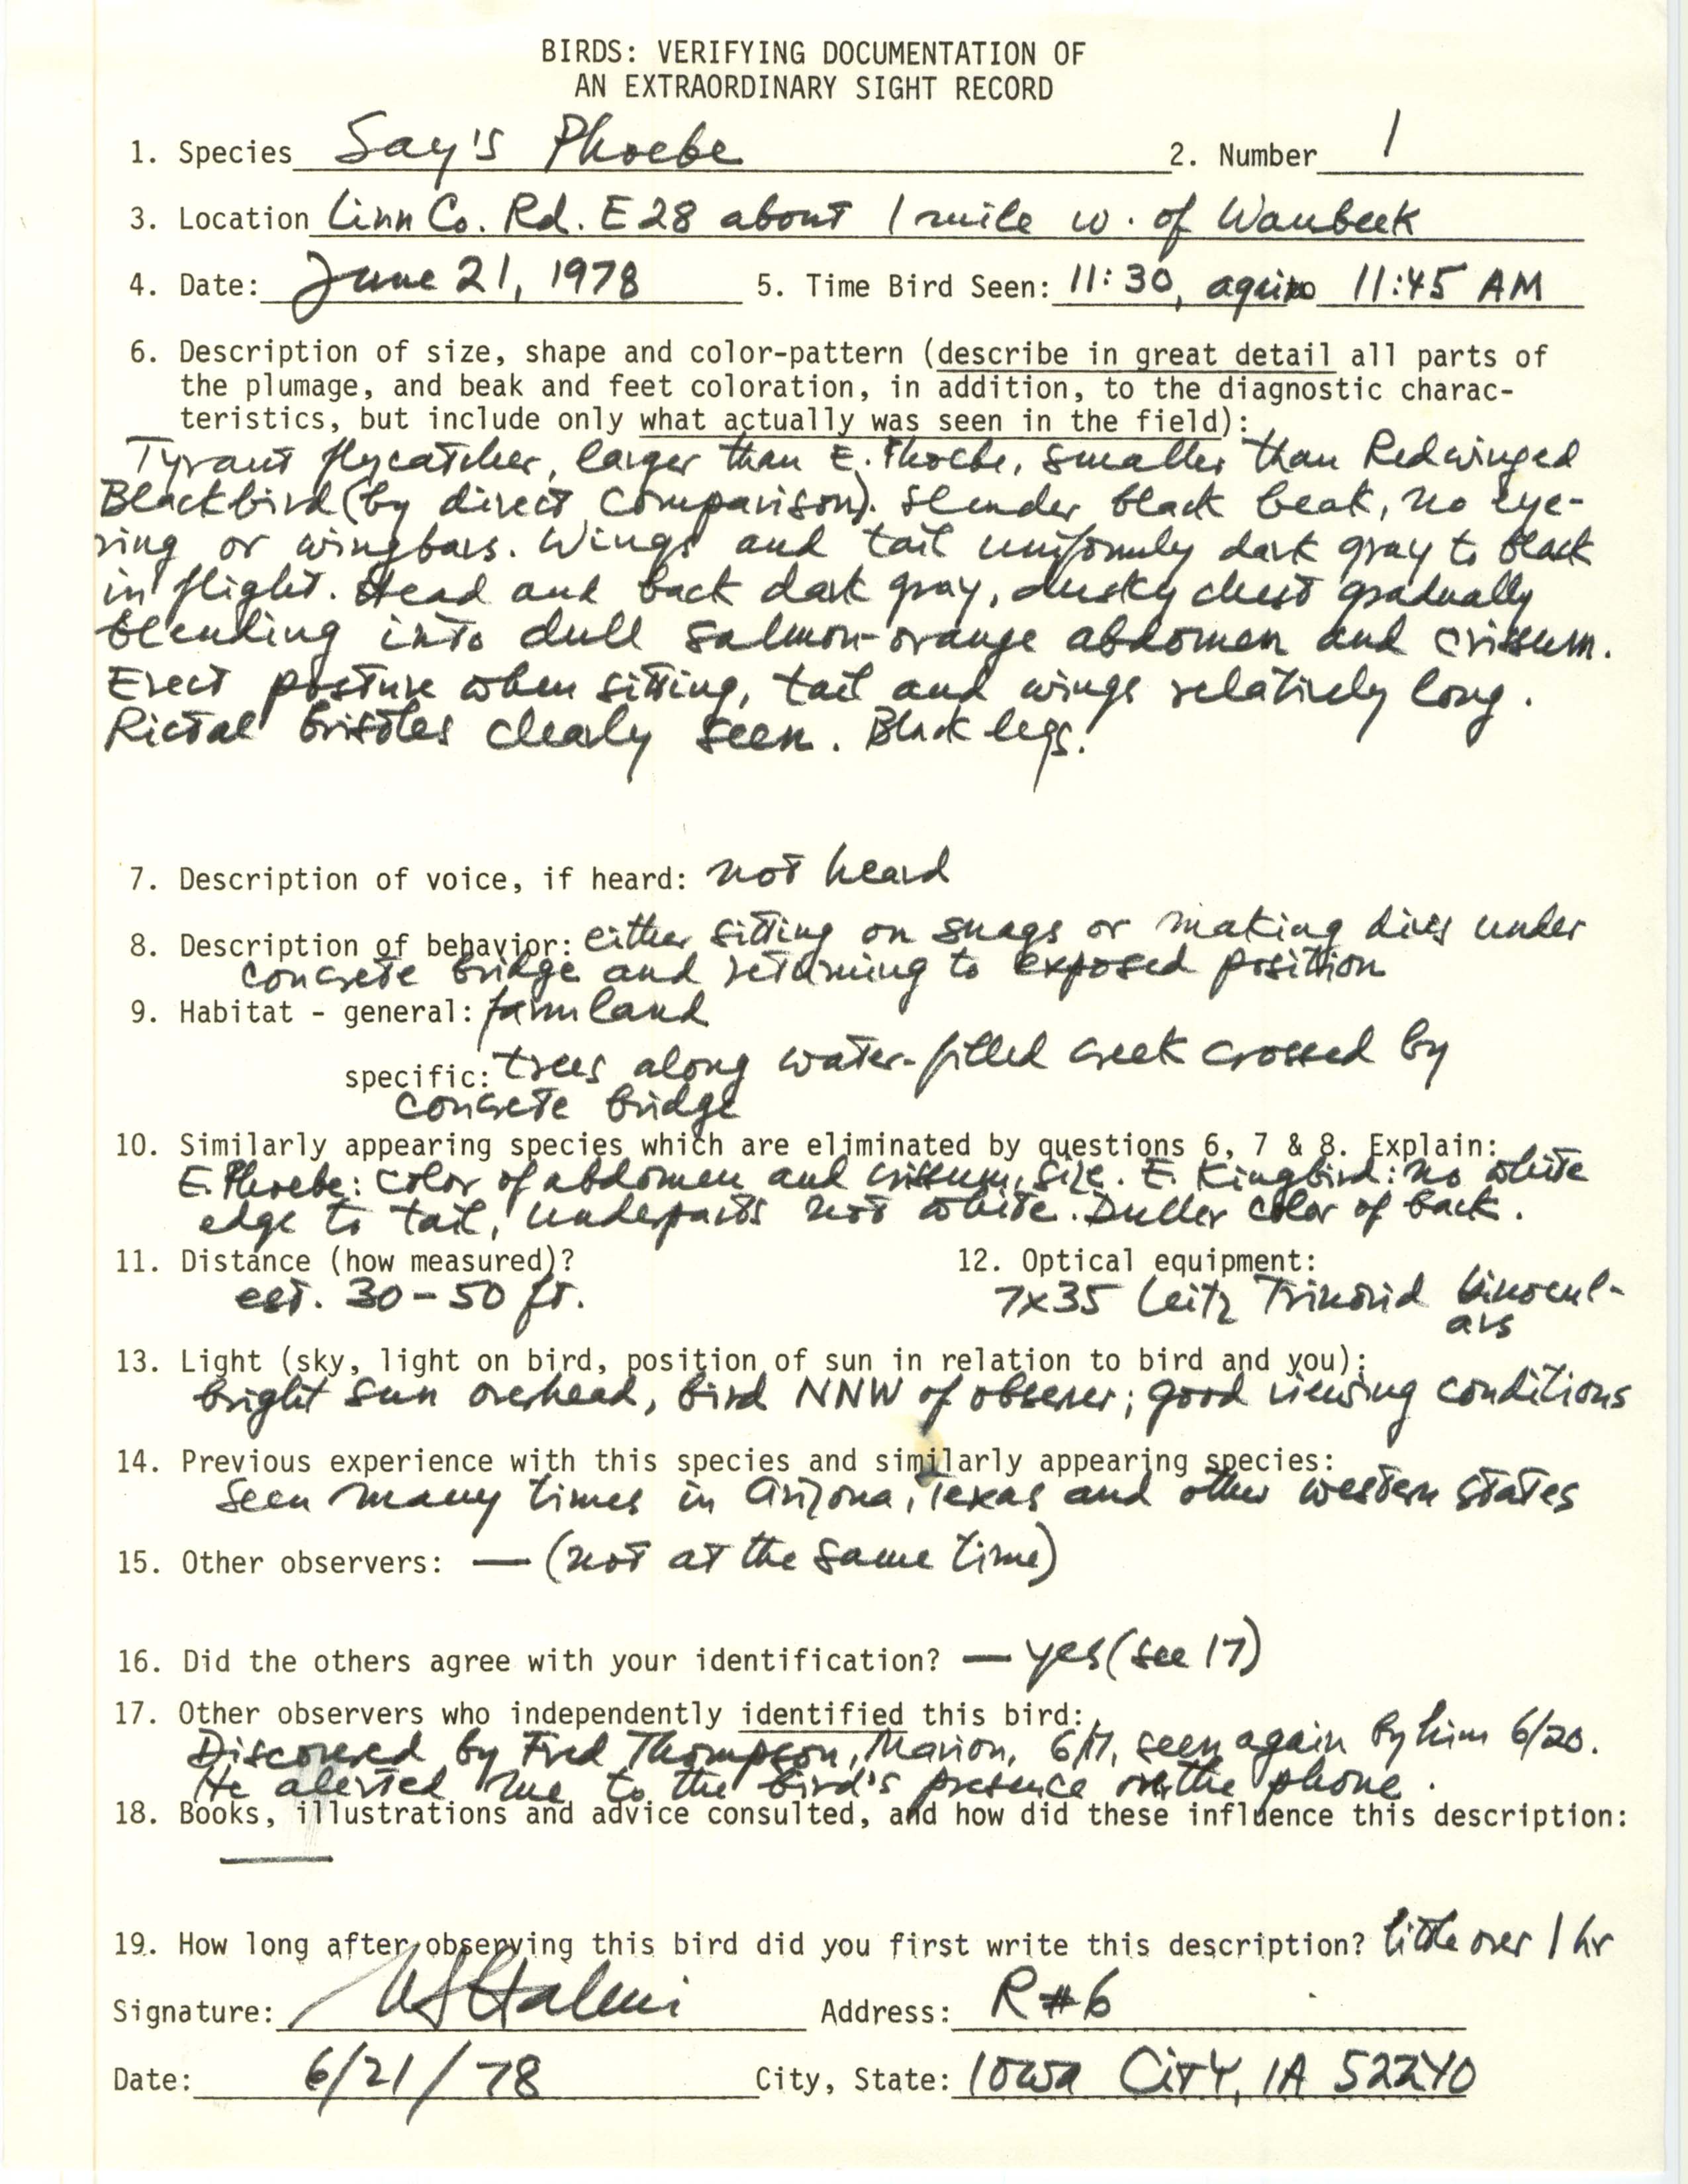 Rare bird documentation form for Say's Phoebe west of Waubeek, 1978